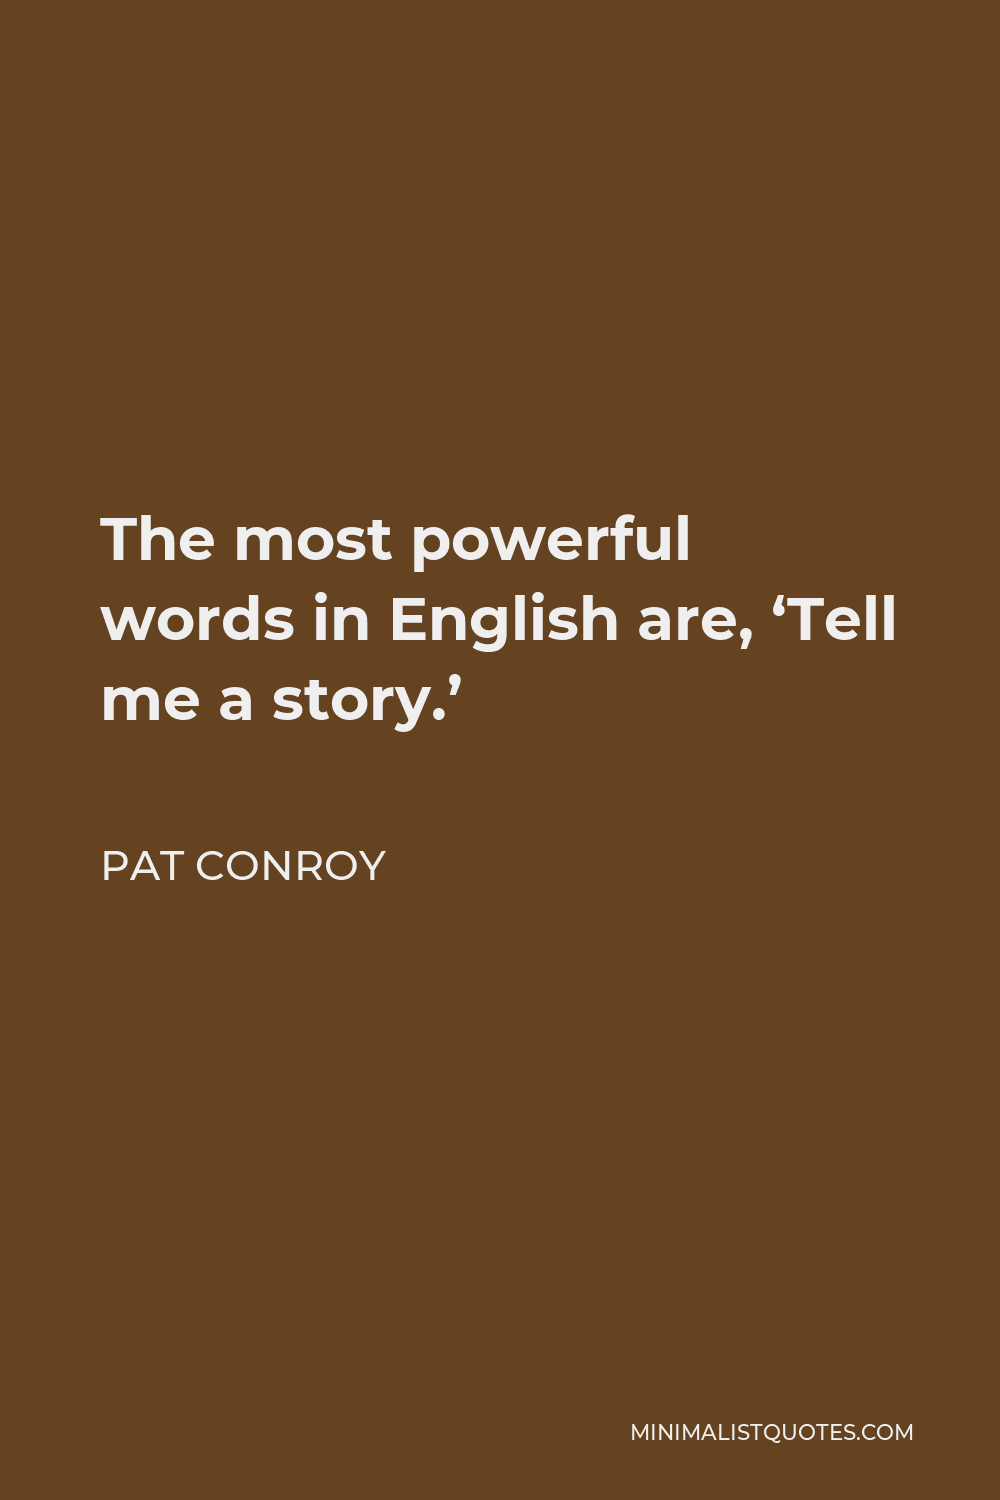 Pat Conroy Quote - The most powerful words in English are, ‘Tell me a story.’